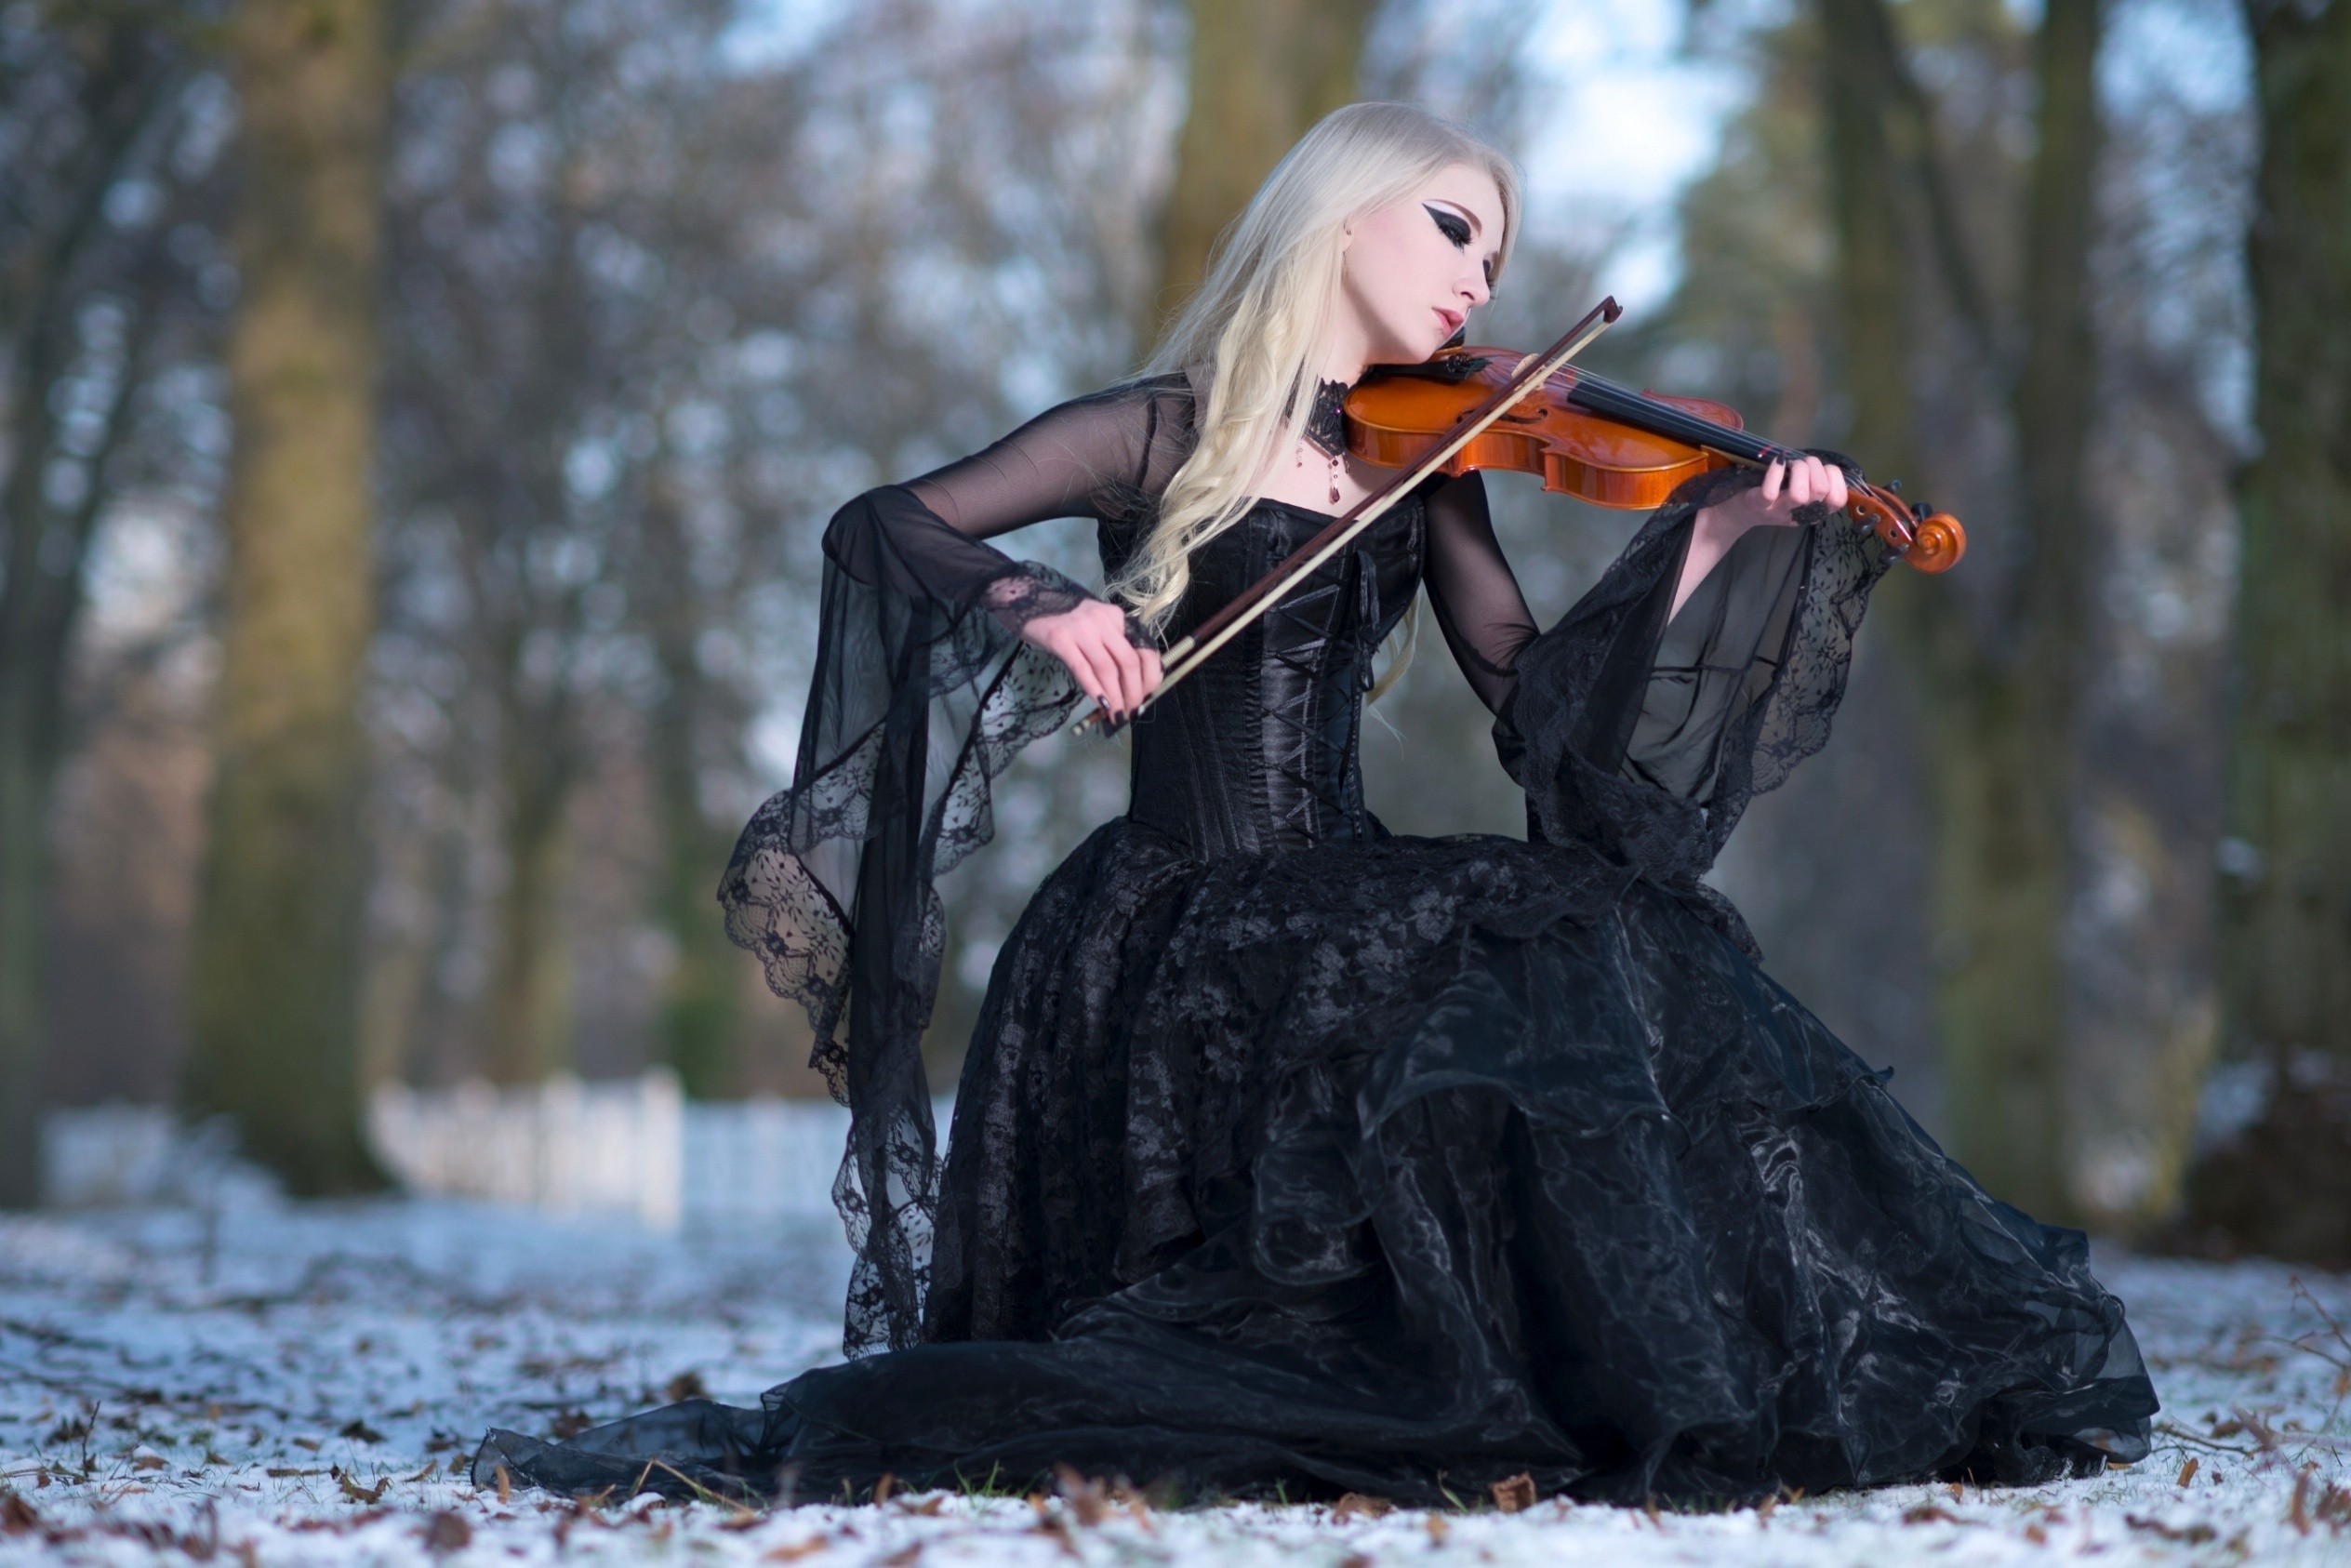 People 2528x1686 violin women women outdoors Gothic snow wood Maria Amanda music musical instrument winter frost cold outdoors dress black dress black clothing makeup lipstick eyeliner dyed hair long hair sitting